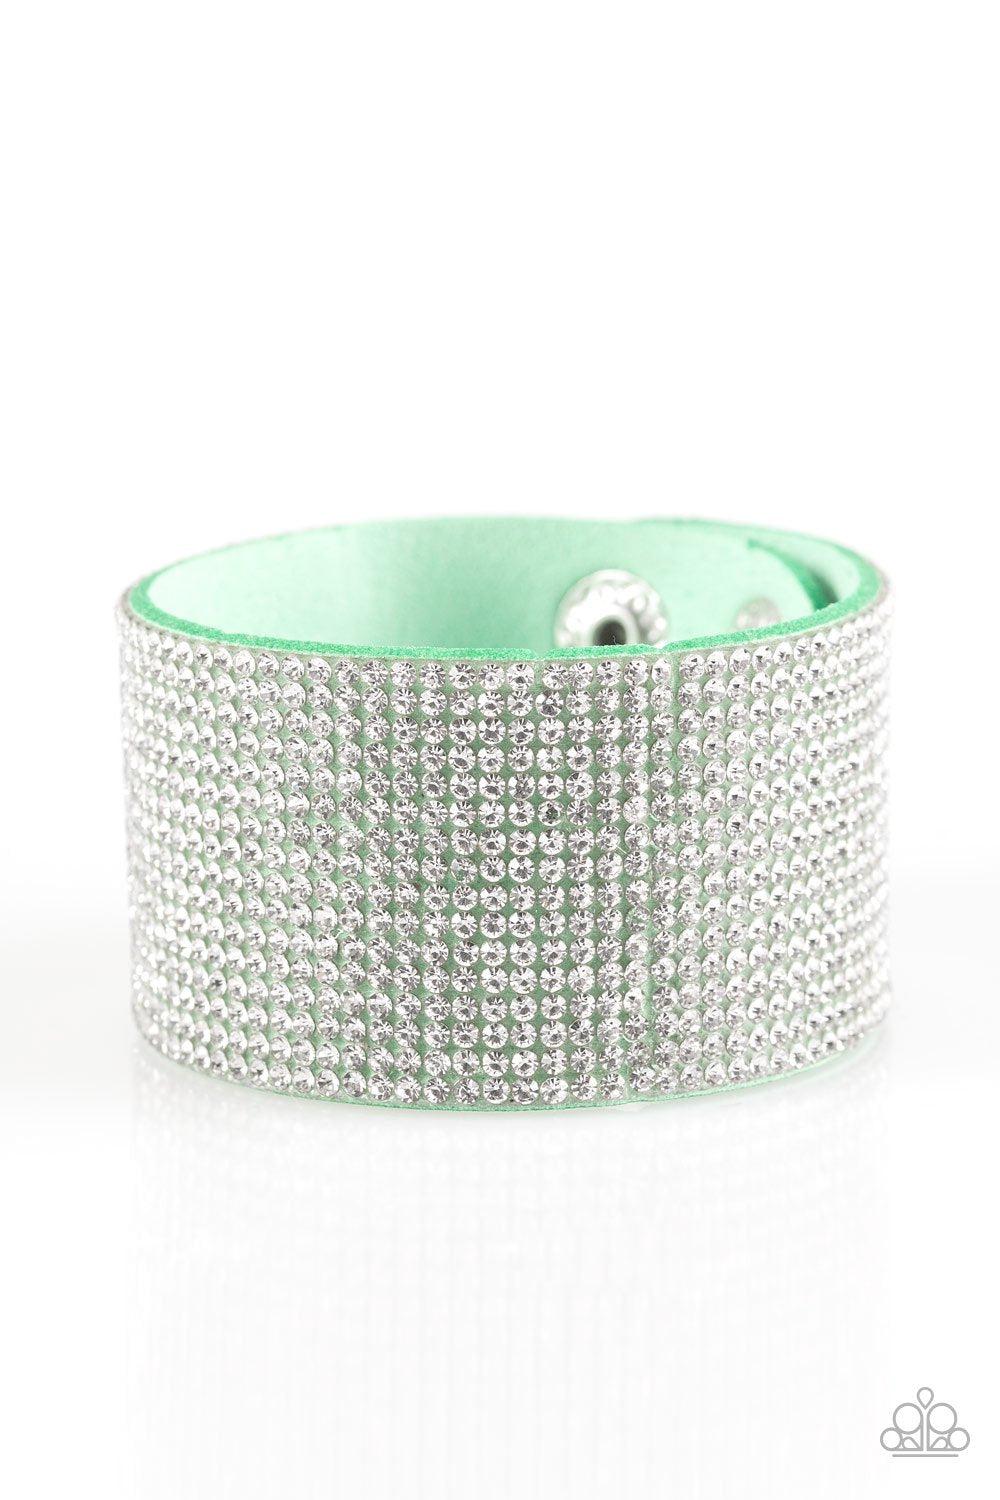 Roll With The Punches Green and White Rhinestone Urban Wrap Snap Bracelet - Paparazzi Accessories-CarasShop.com - $5 Jewelry by Cara Jewels